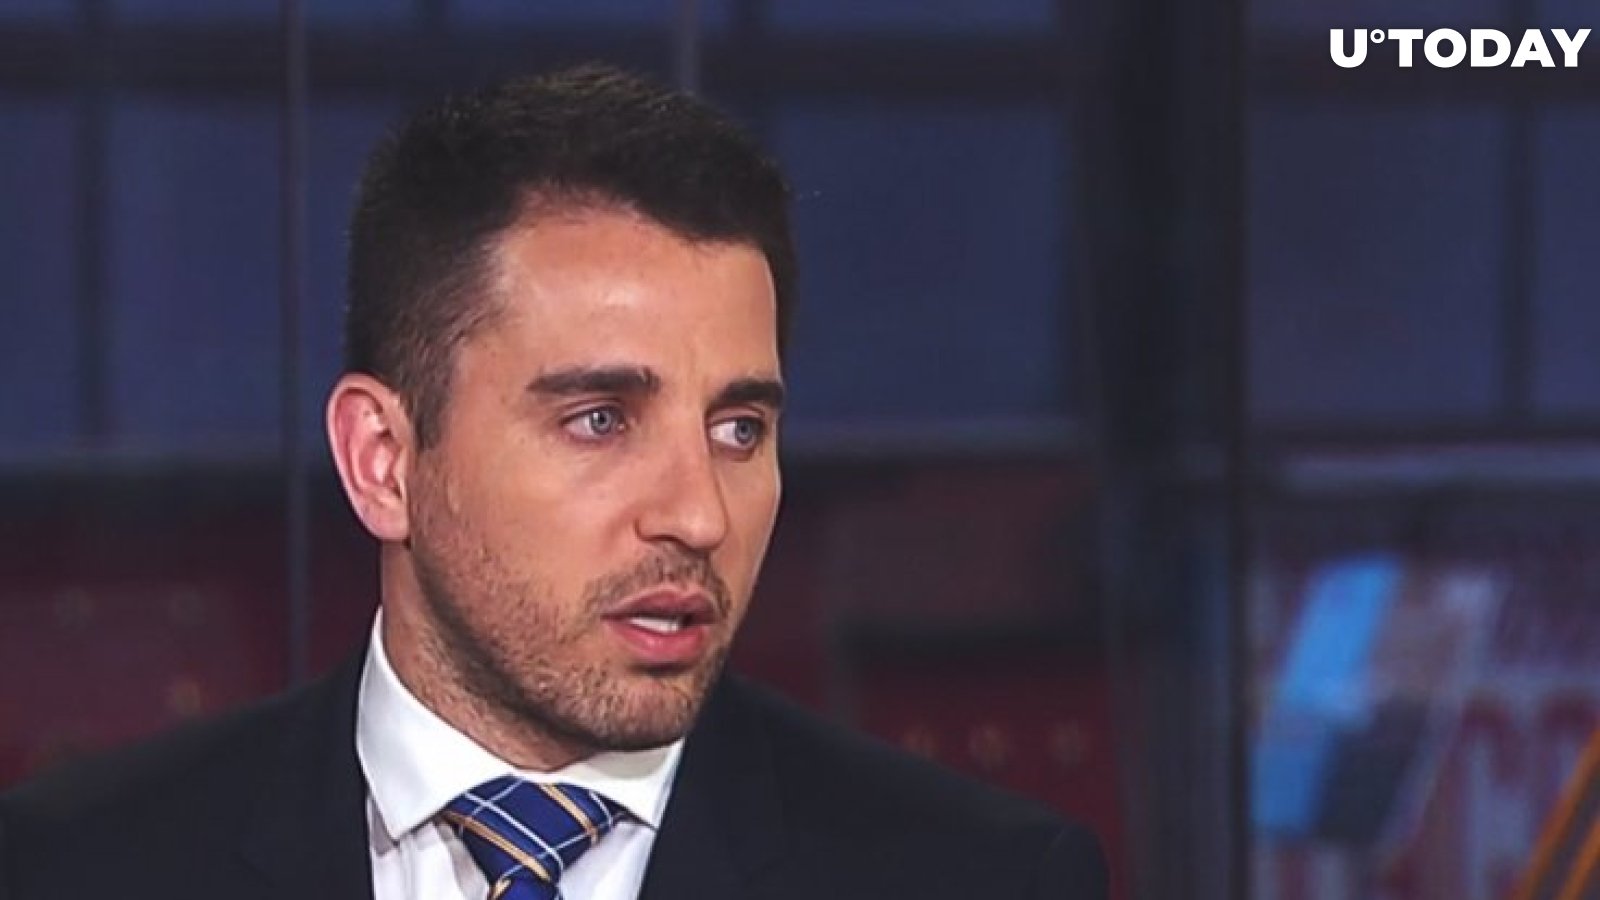 Goldman’s Multi-Billion Dollar Scandal Shows That Criminals Continue to Use Fiat Currencies, Says Bitcoin Advocate Anthony Pompliano